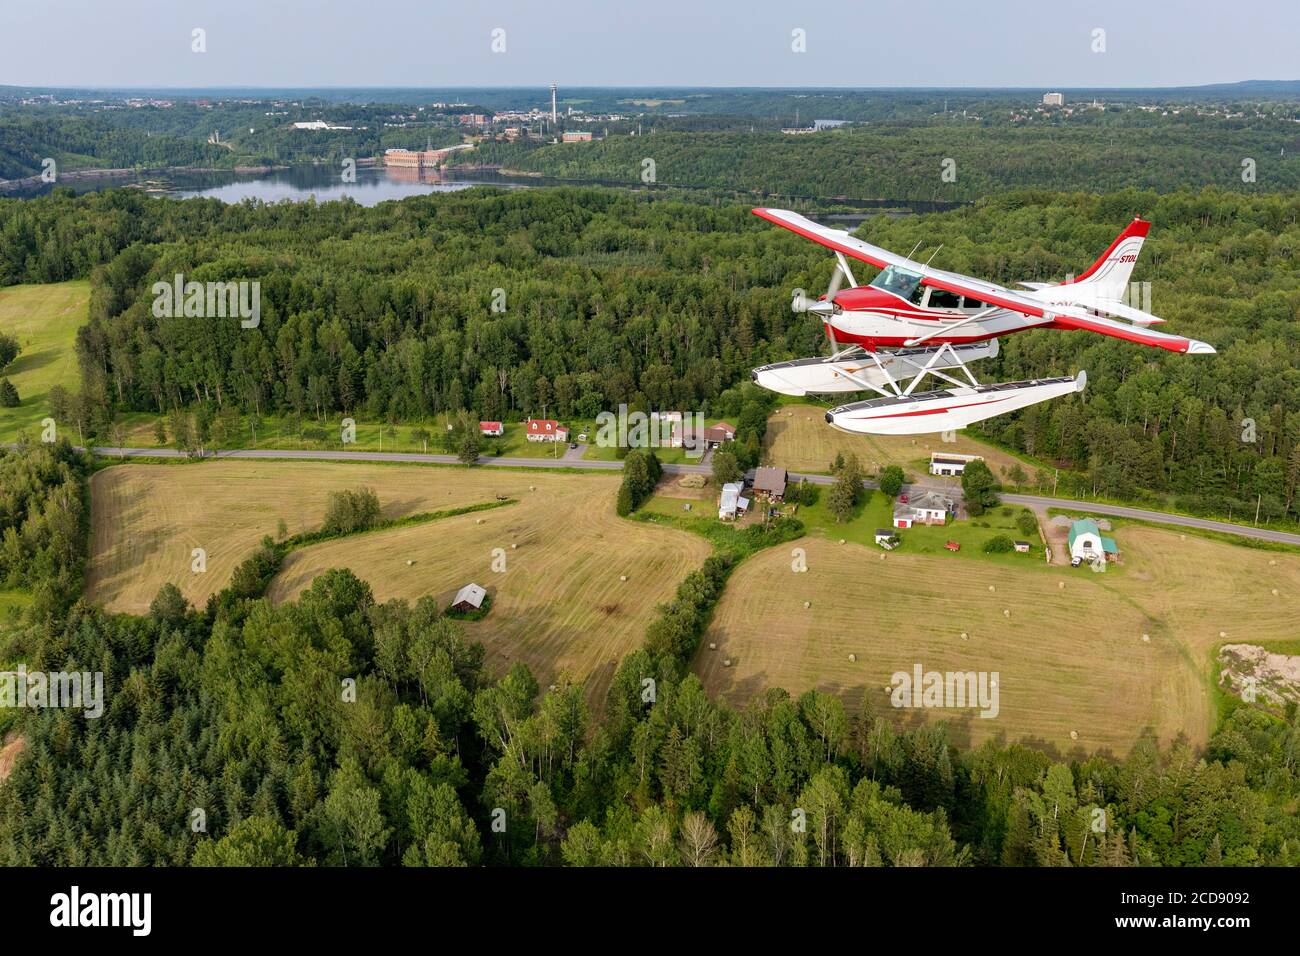 Canada, Province of Quebec, Mauricie Region, Hydravion Aventure, Cessna 206 flight over the fields on the edge of the city of Shawinigan Stock Photo